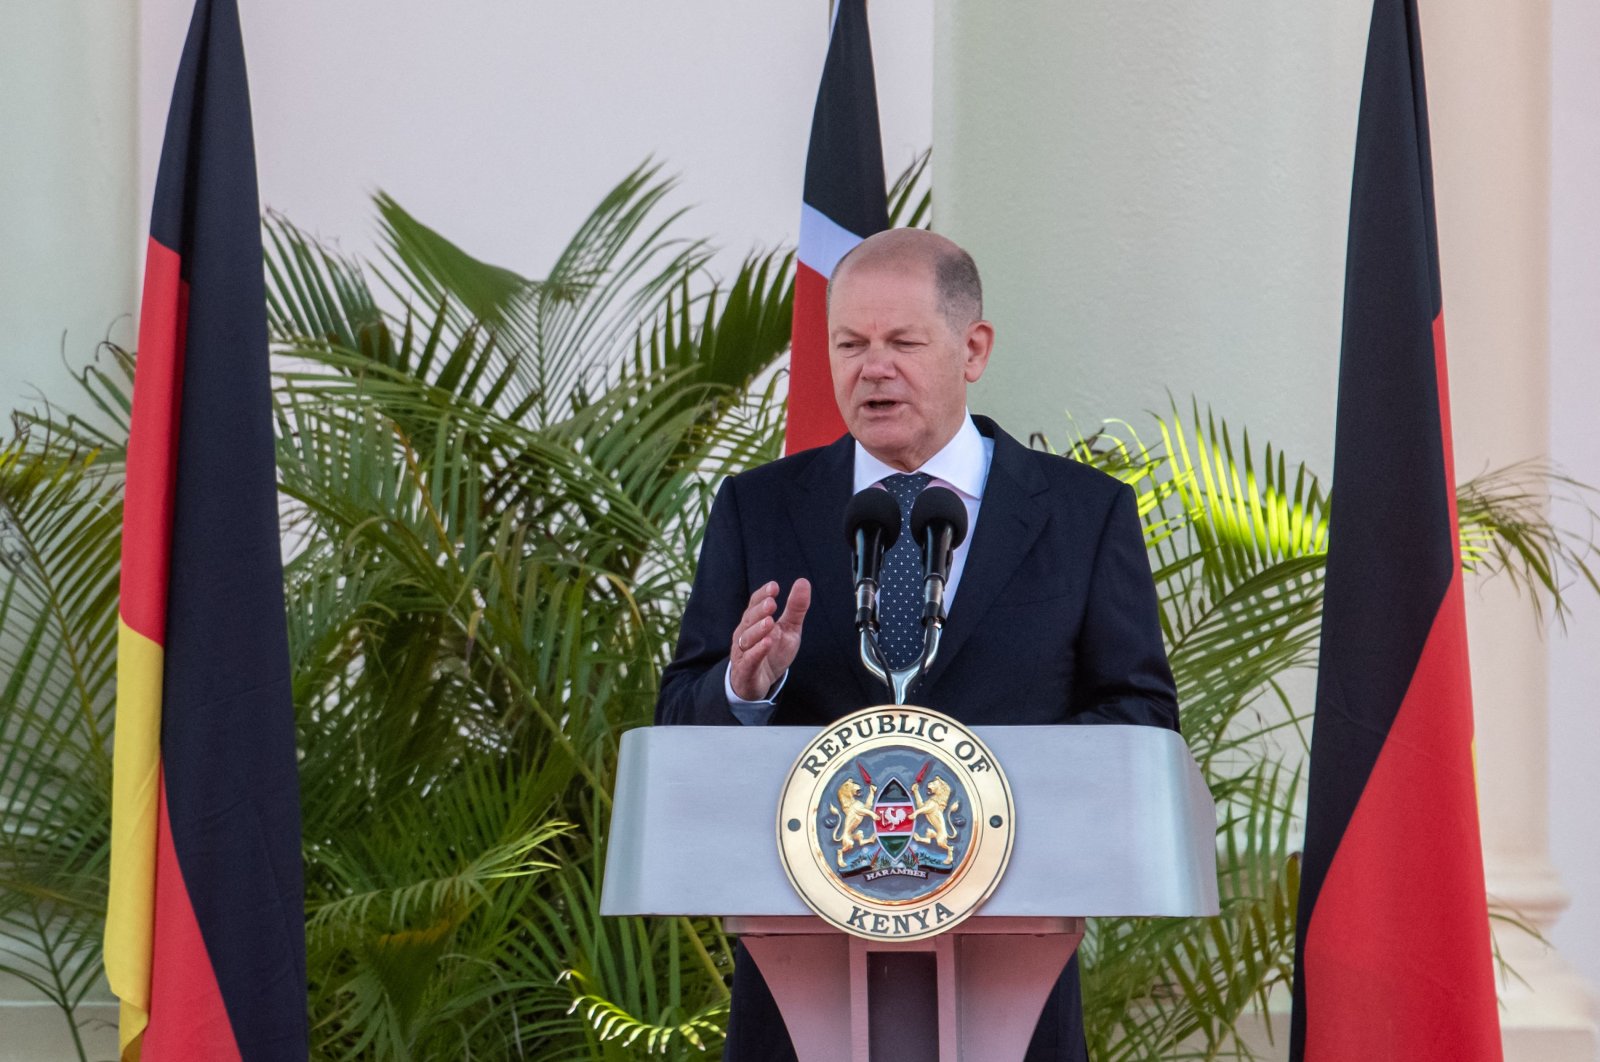 German Chancellor Olaf Scholz speaks during a joint press conference with Kenyan President William Ruto (not seen) at the State House in Nairobi, Kenya, May 5, 2023. (AFP Photo)